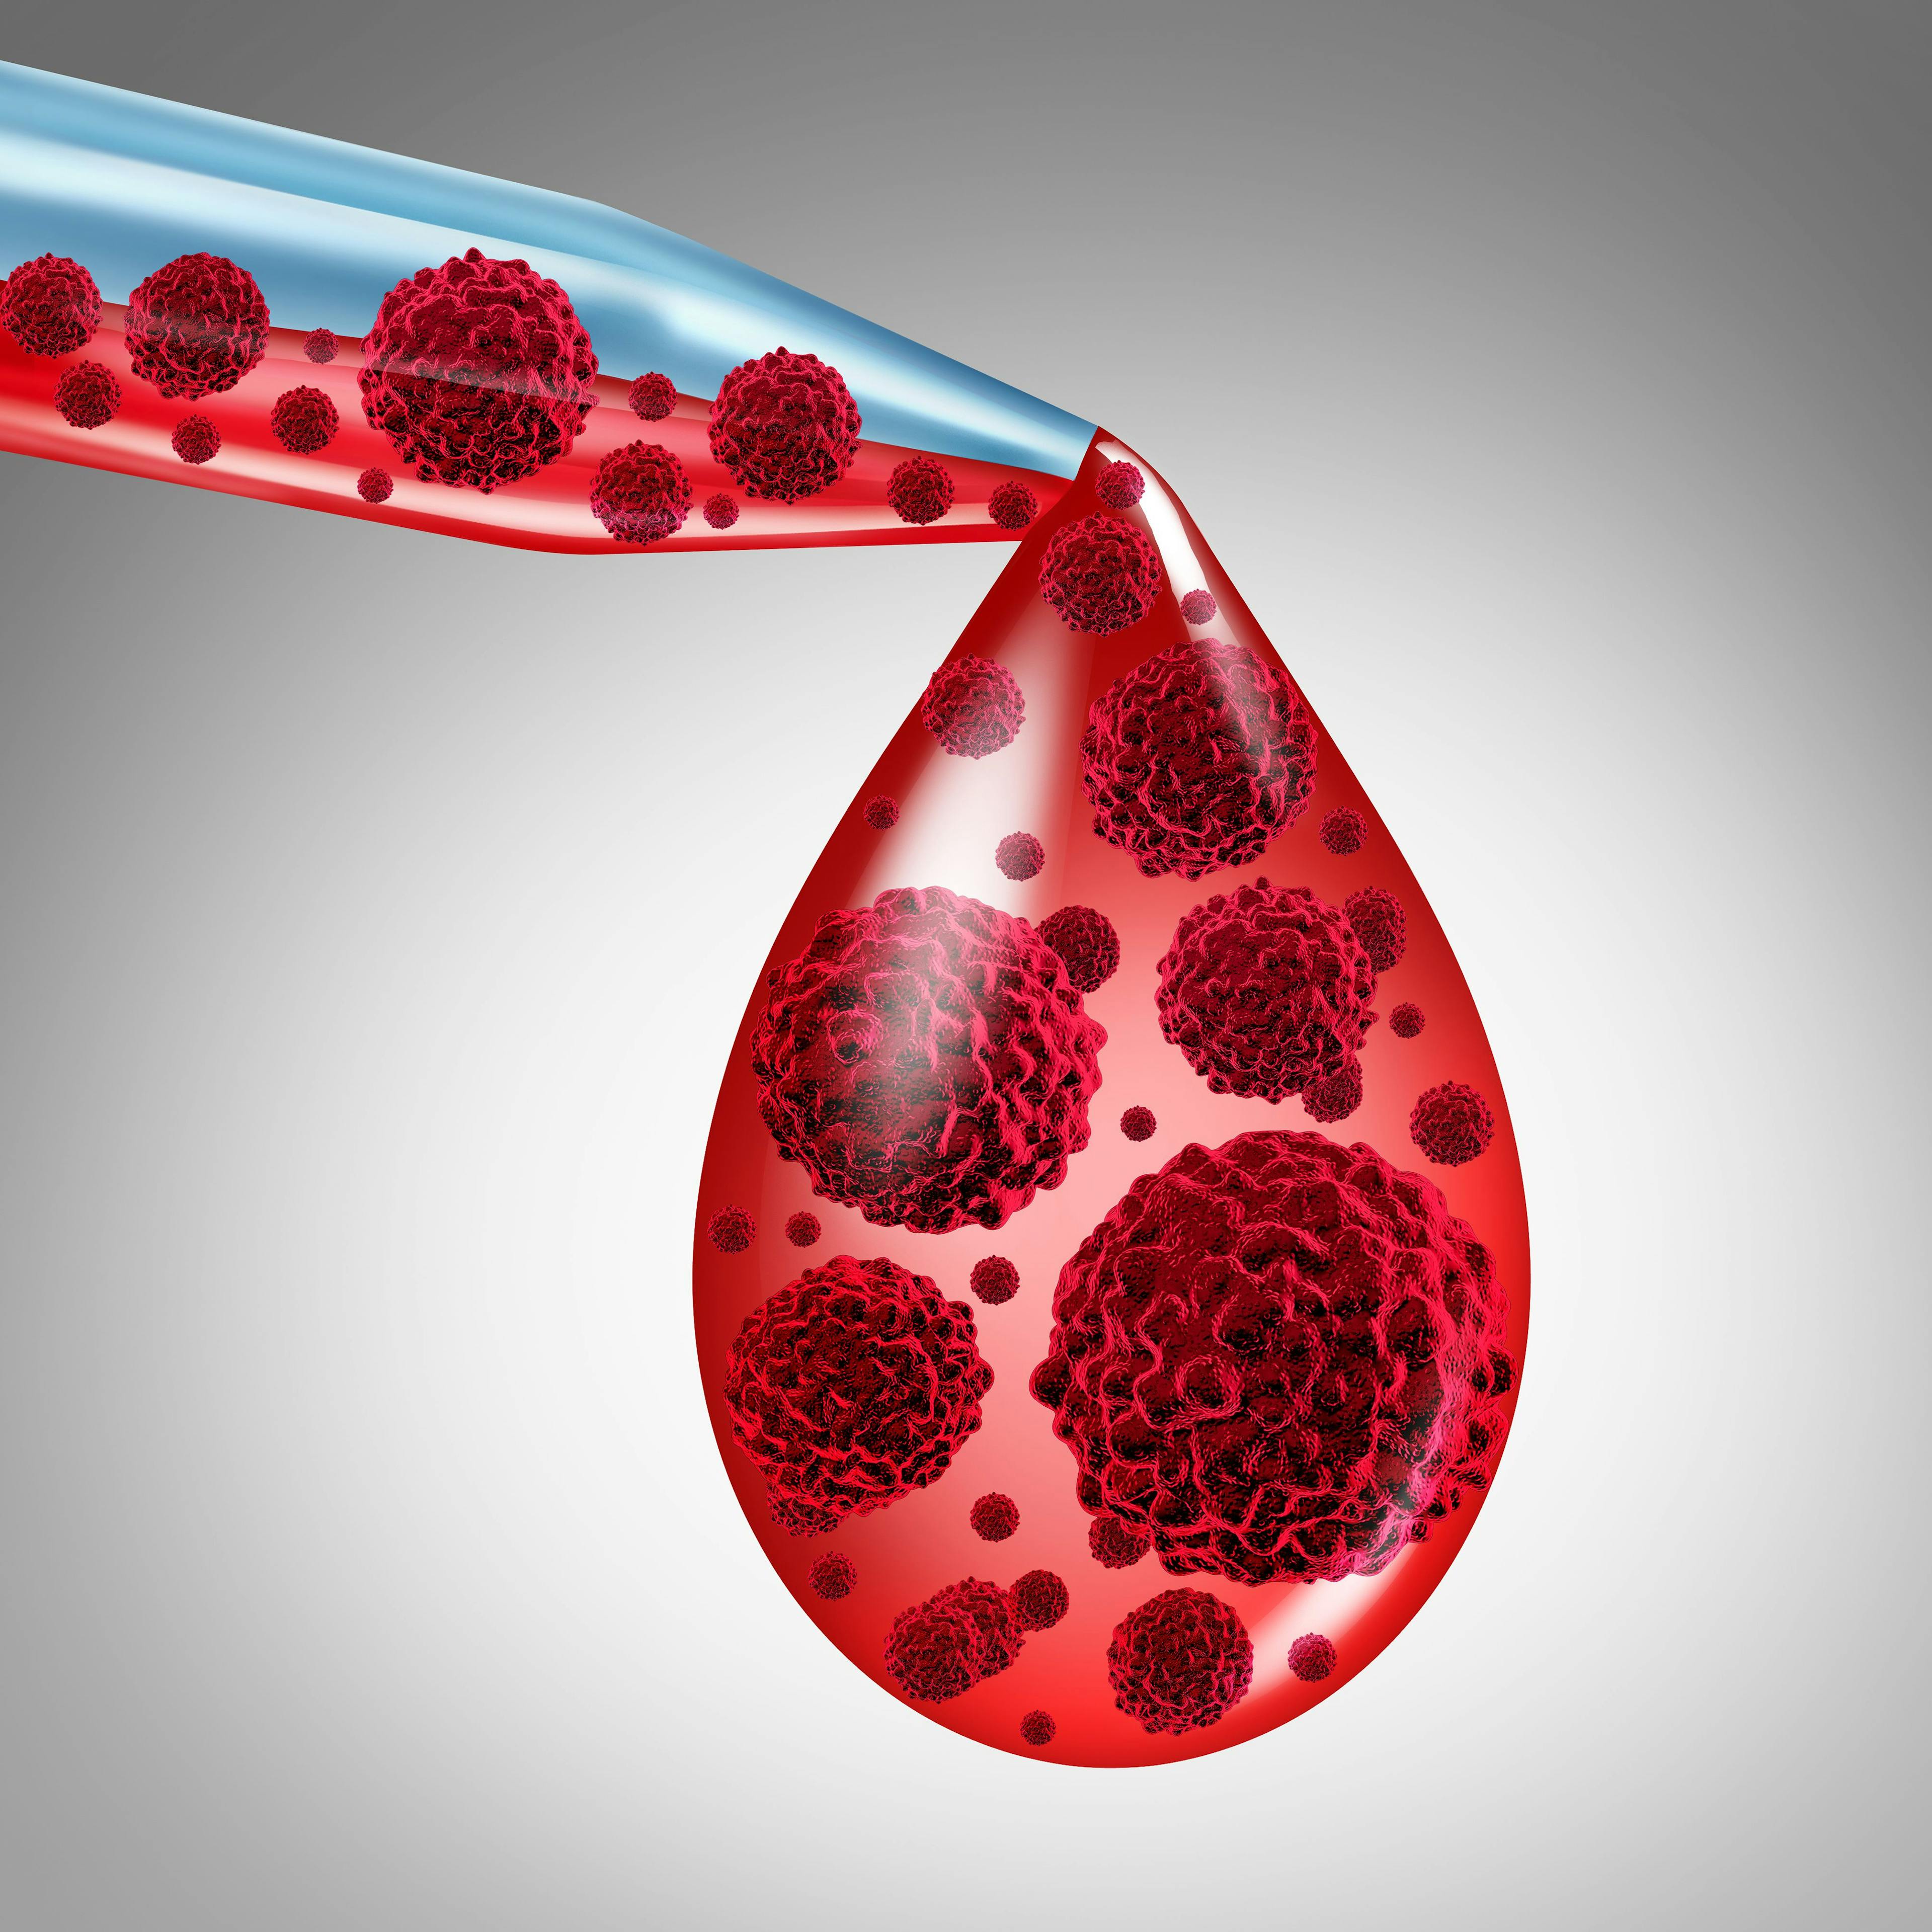 A dropper with blood and visible blood cells.